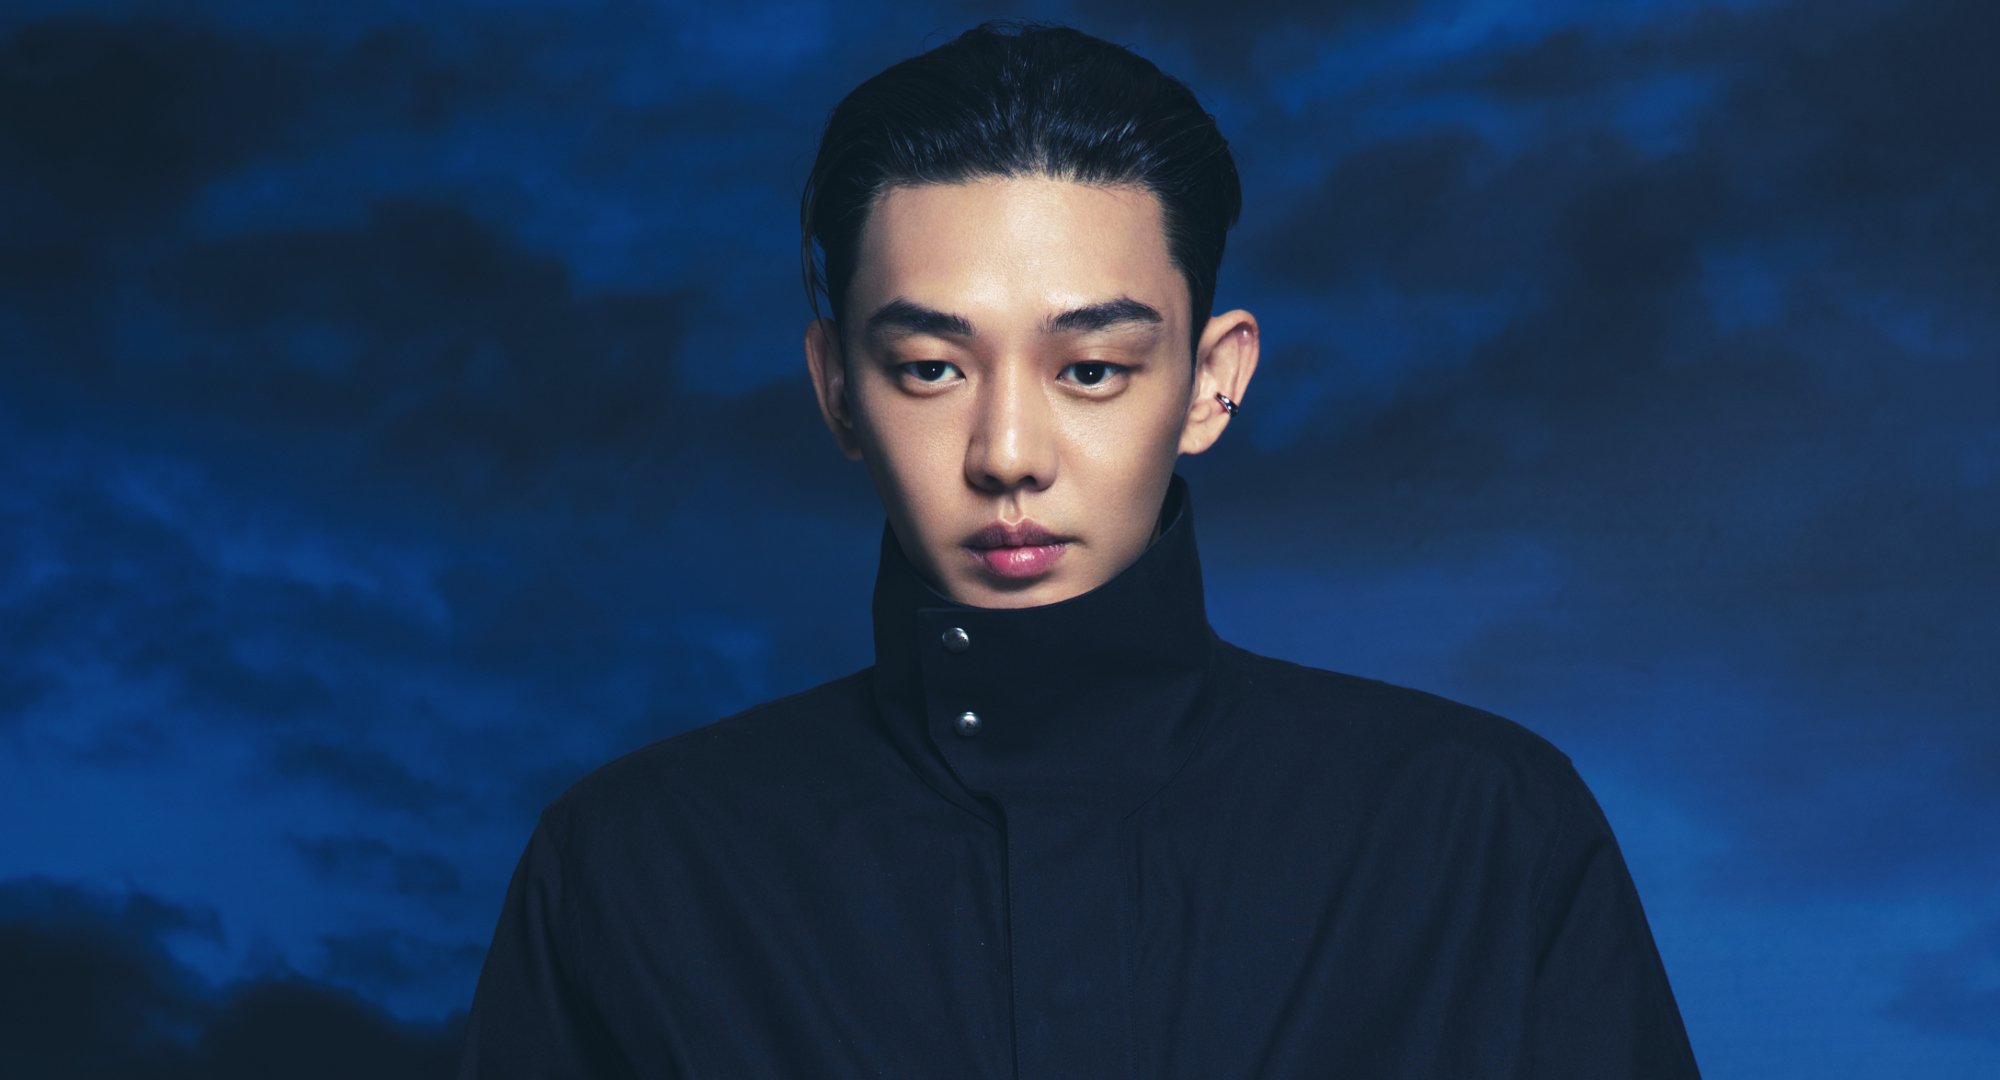 Yoo Ah-in Undergoes Interrogation for Drug Use as ‘The Match’ and ‘Goodbye Earth’ Are Postponed